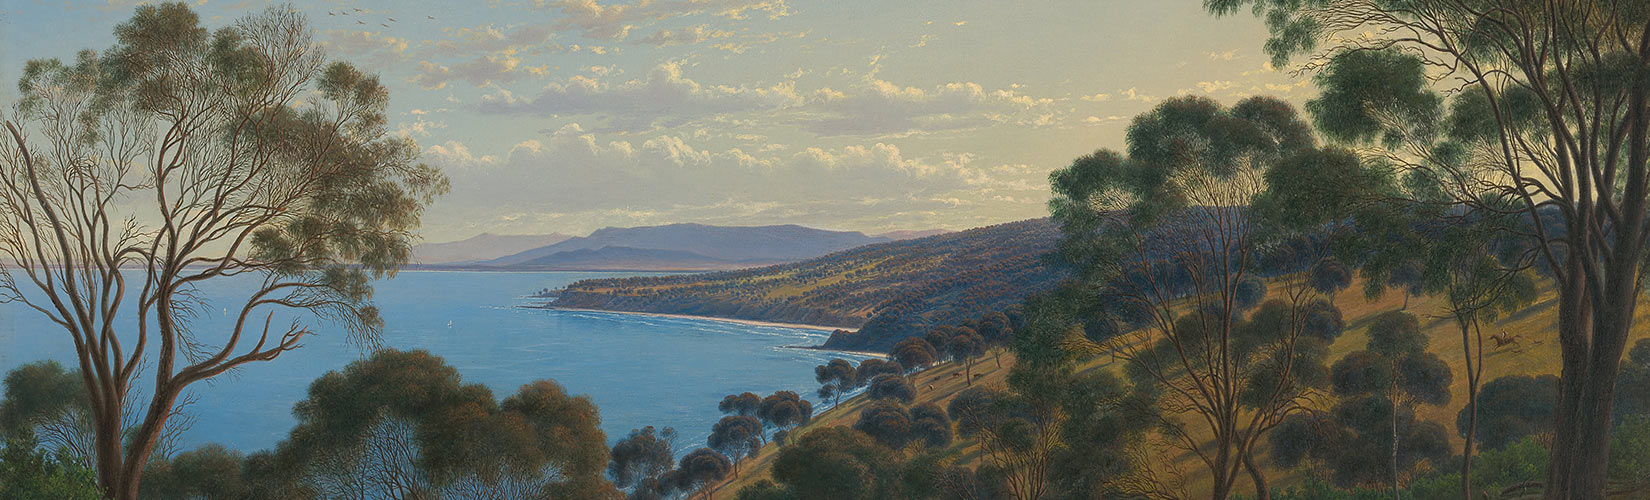 Eugene Von Guerard Dandenong Ranges from 'Beleura' 1870, National Gallery of Australia, Canberra. From the James Fairfax collection, gift of Bridgestar Pty Ltd 1995